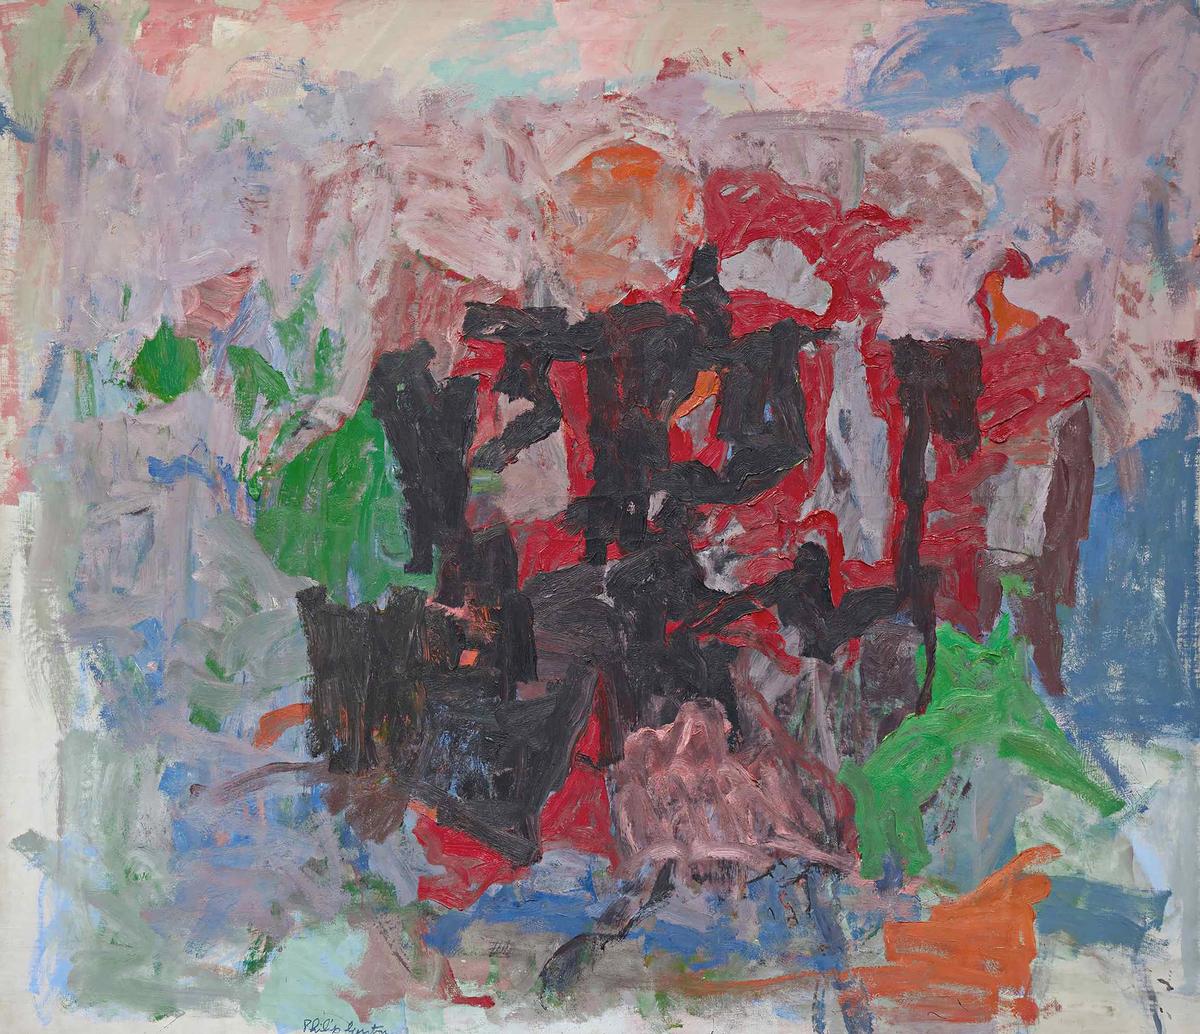 Philip Guston's Nile (1957) will be offered at Sotheby's New York for between $20m and $30m. Courtesy of Sotheby's